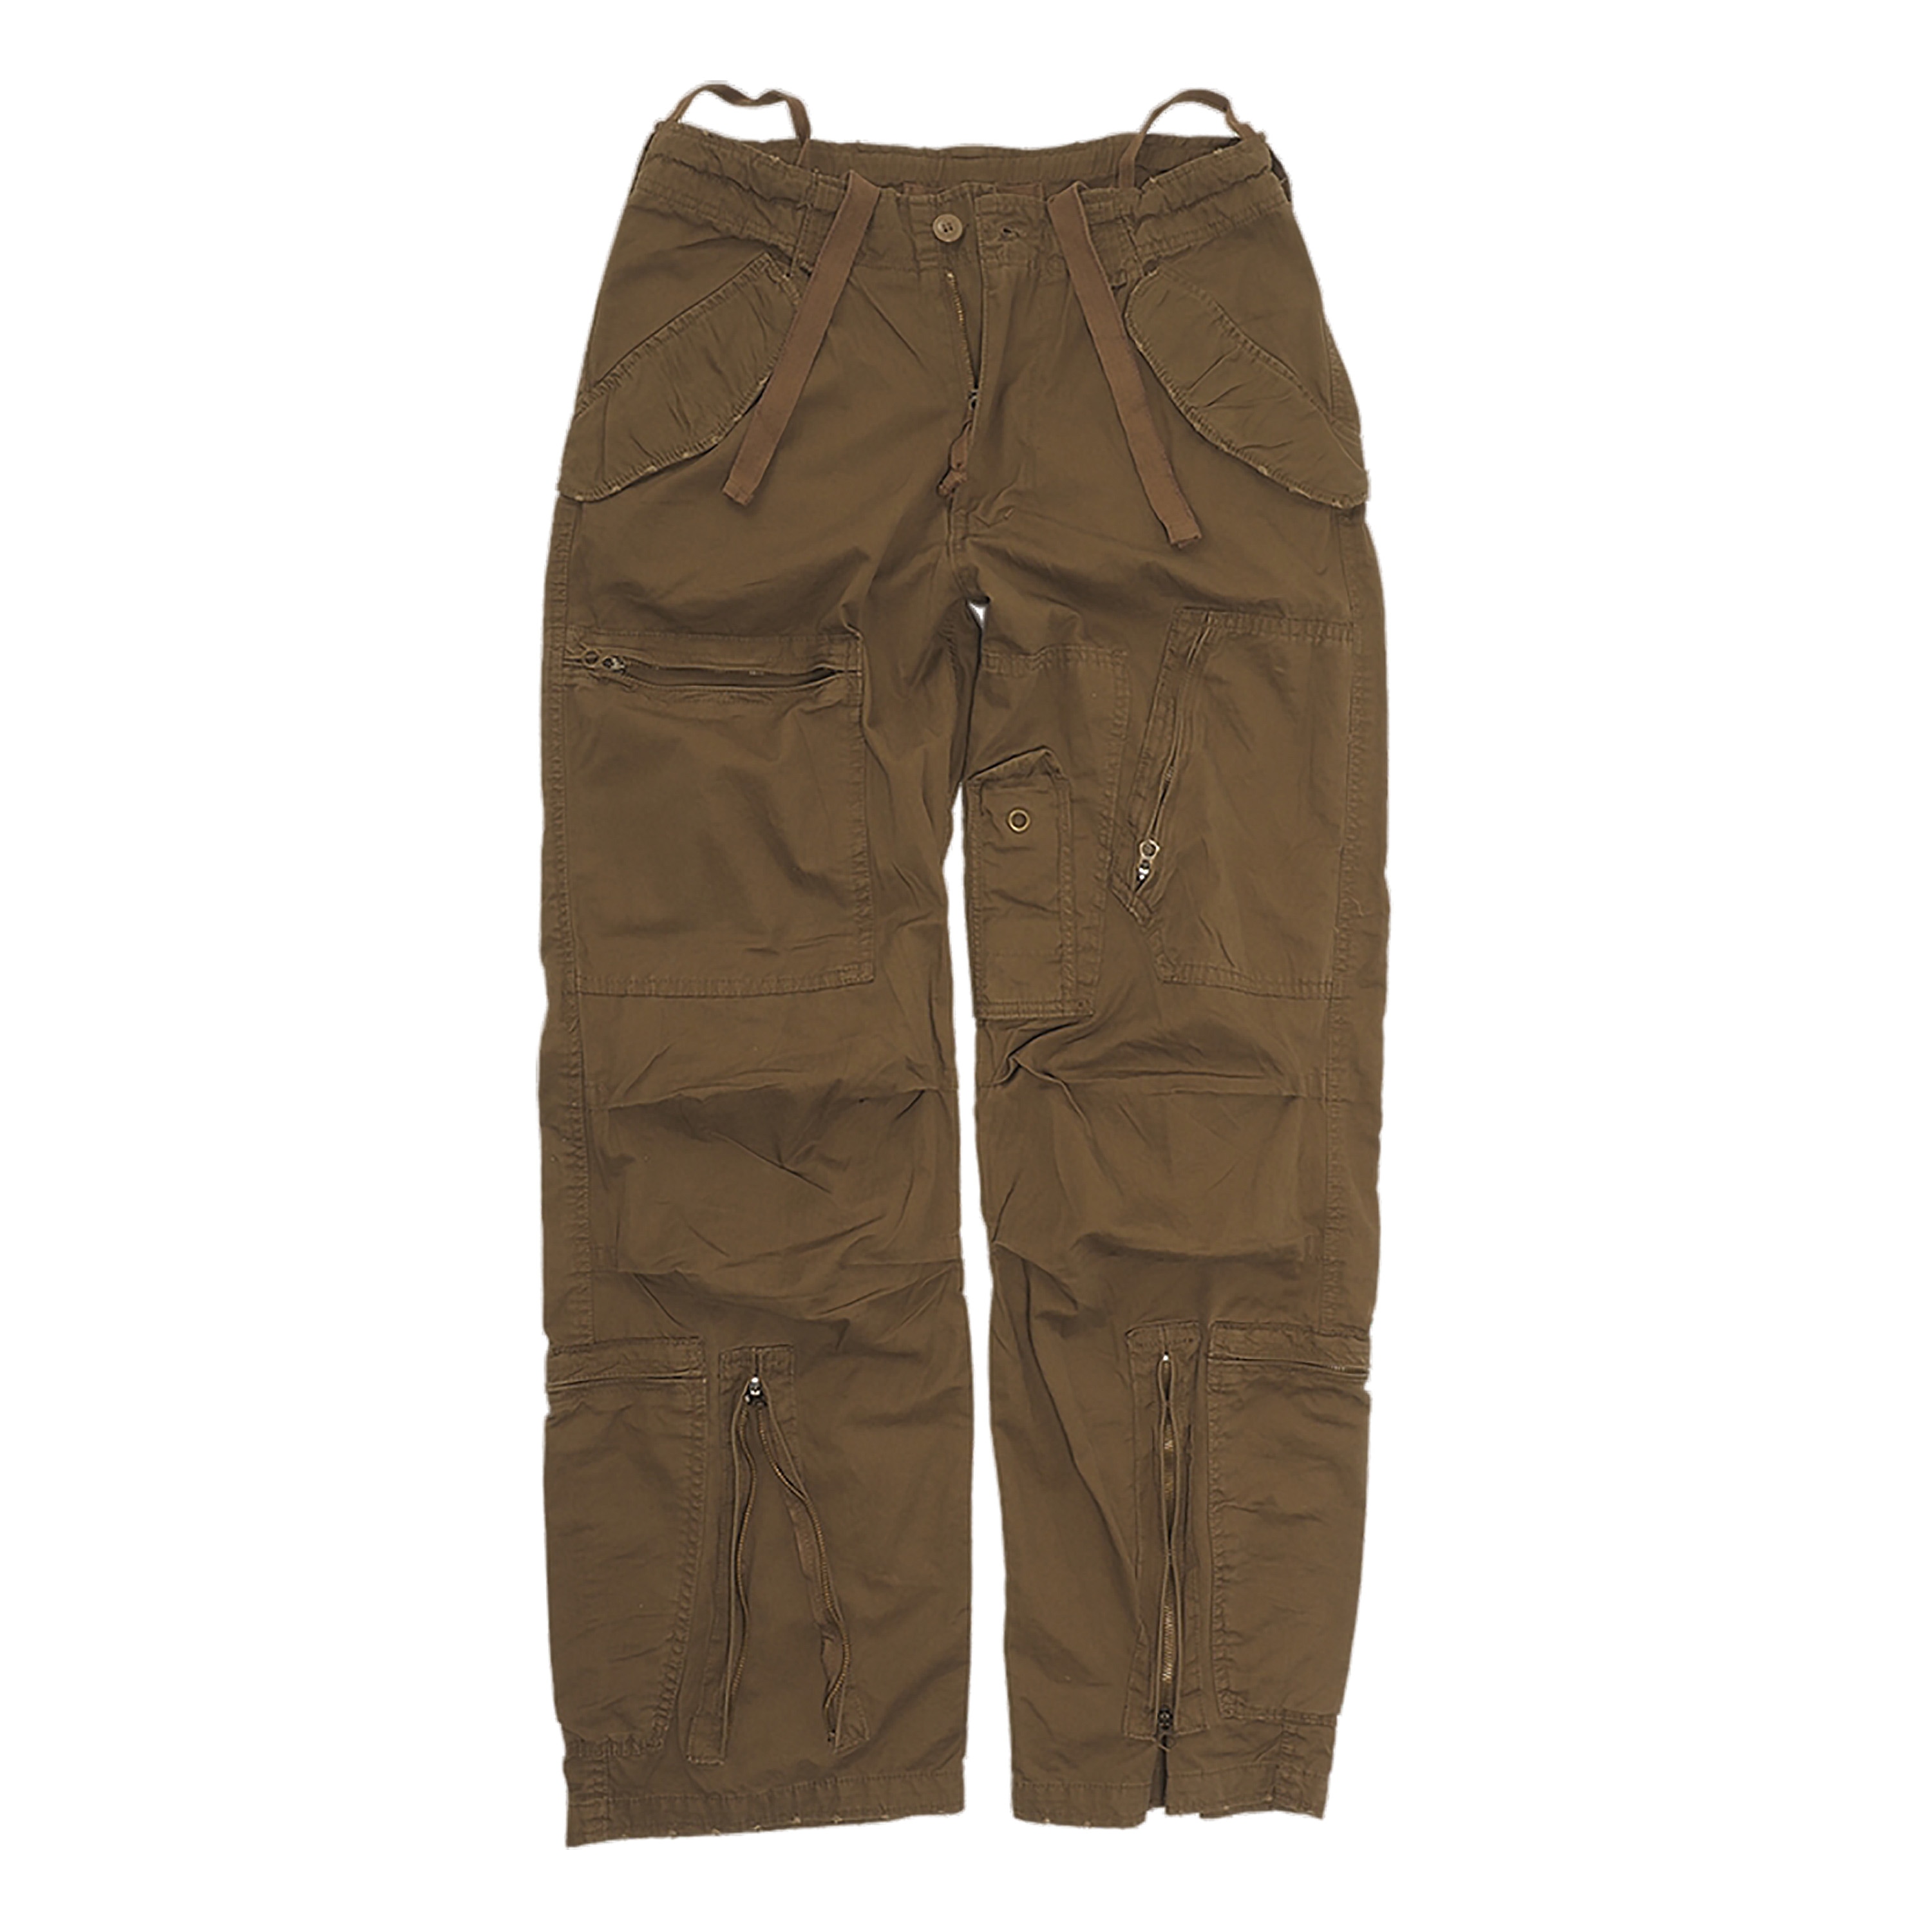 Aviator Trousers Vintage coyote | Aviator Trousers Vintage coyote ...